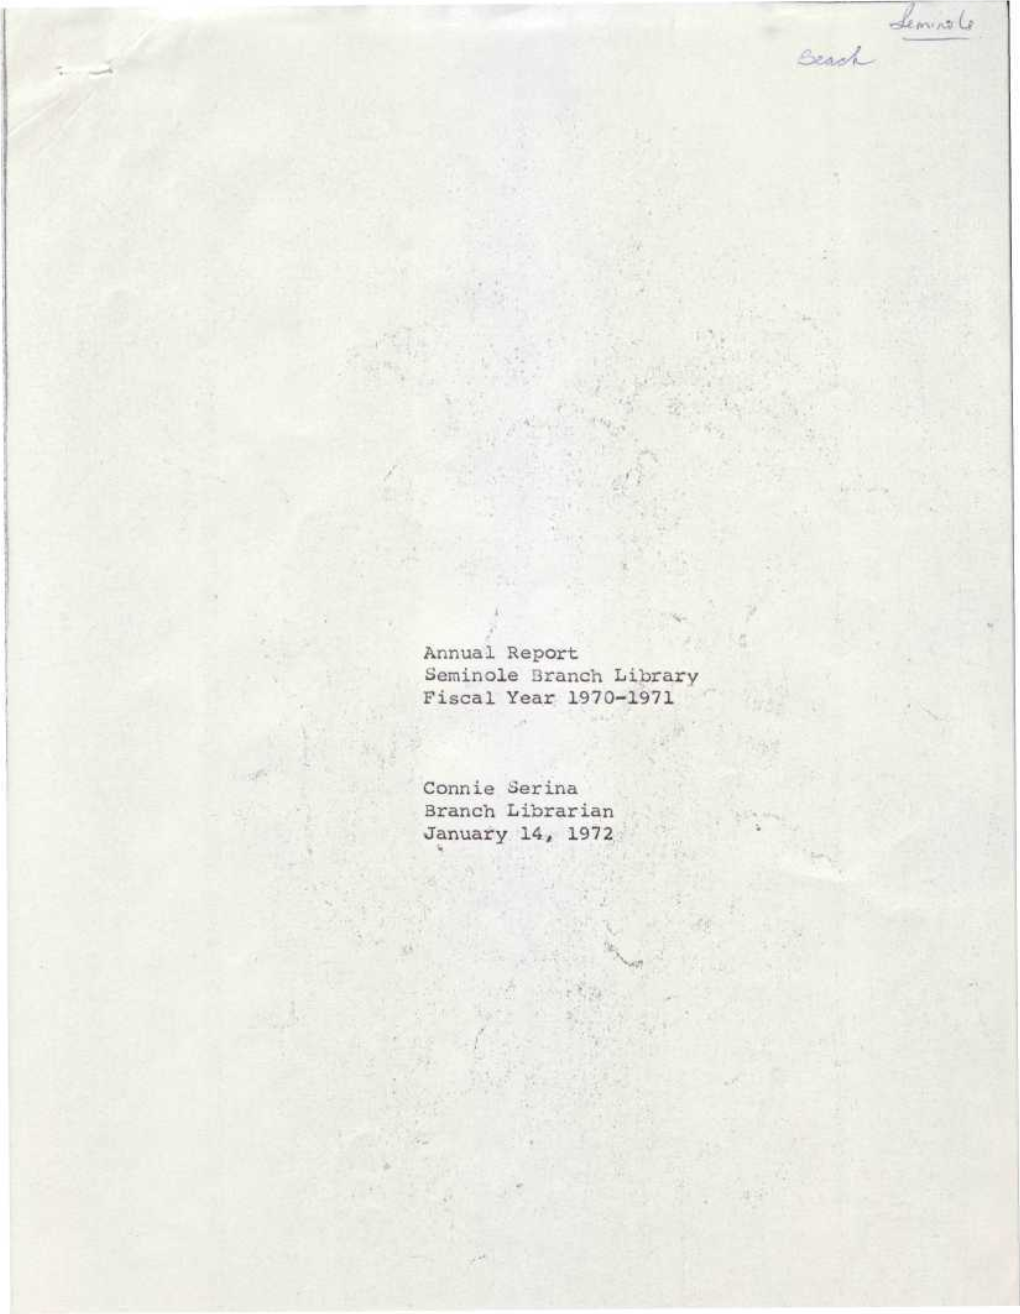 Annual Report Seminole Branch Library Fiscal Year 1970-1971